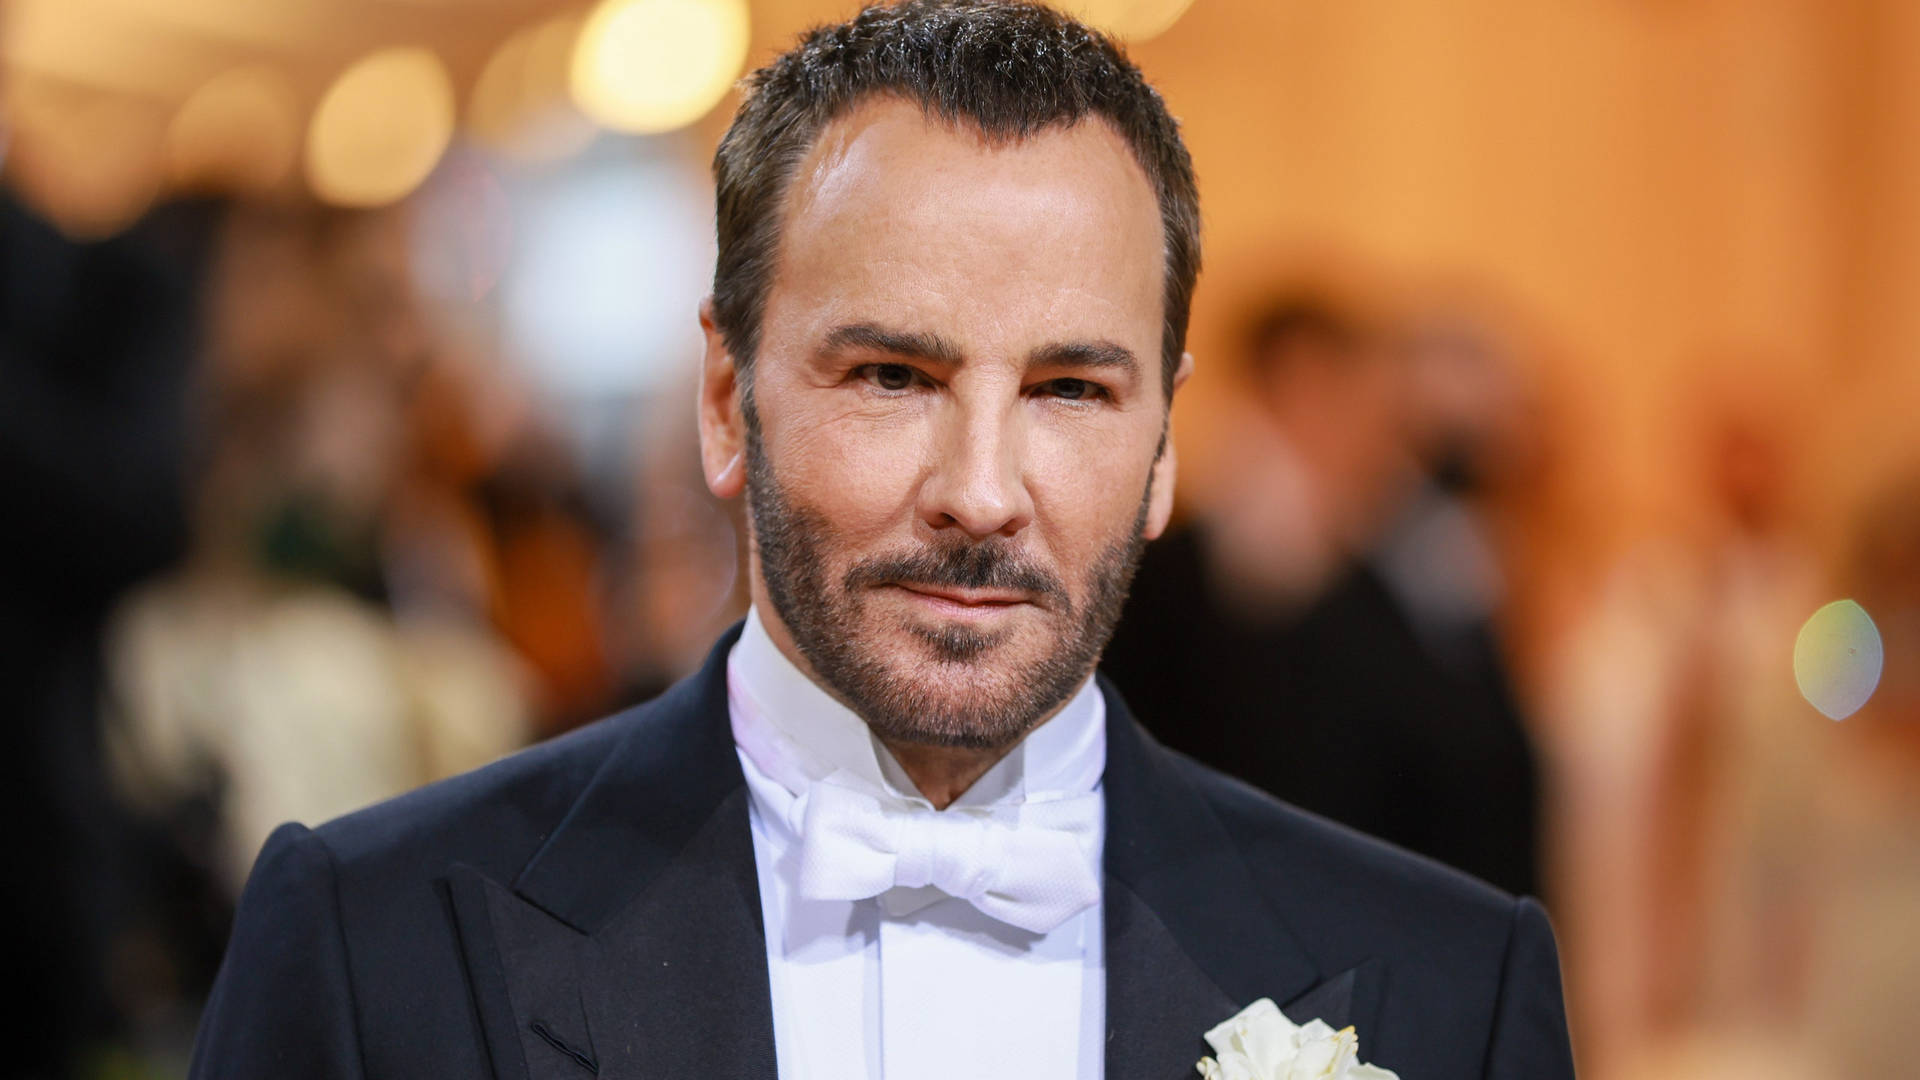 Tom Ford With White Bowtie Wallpaper